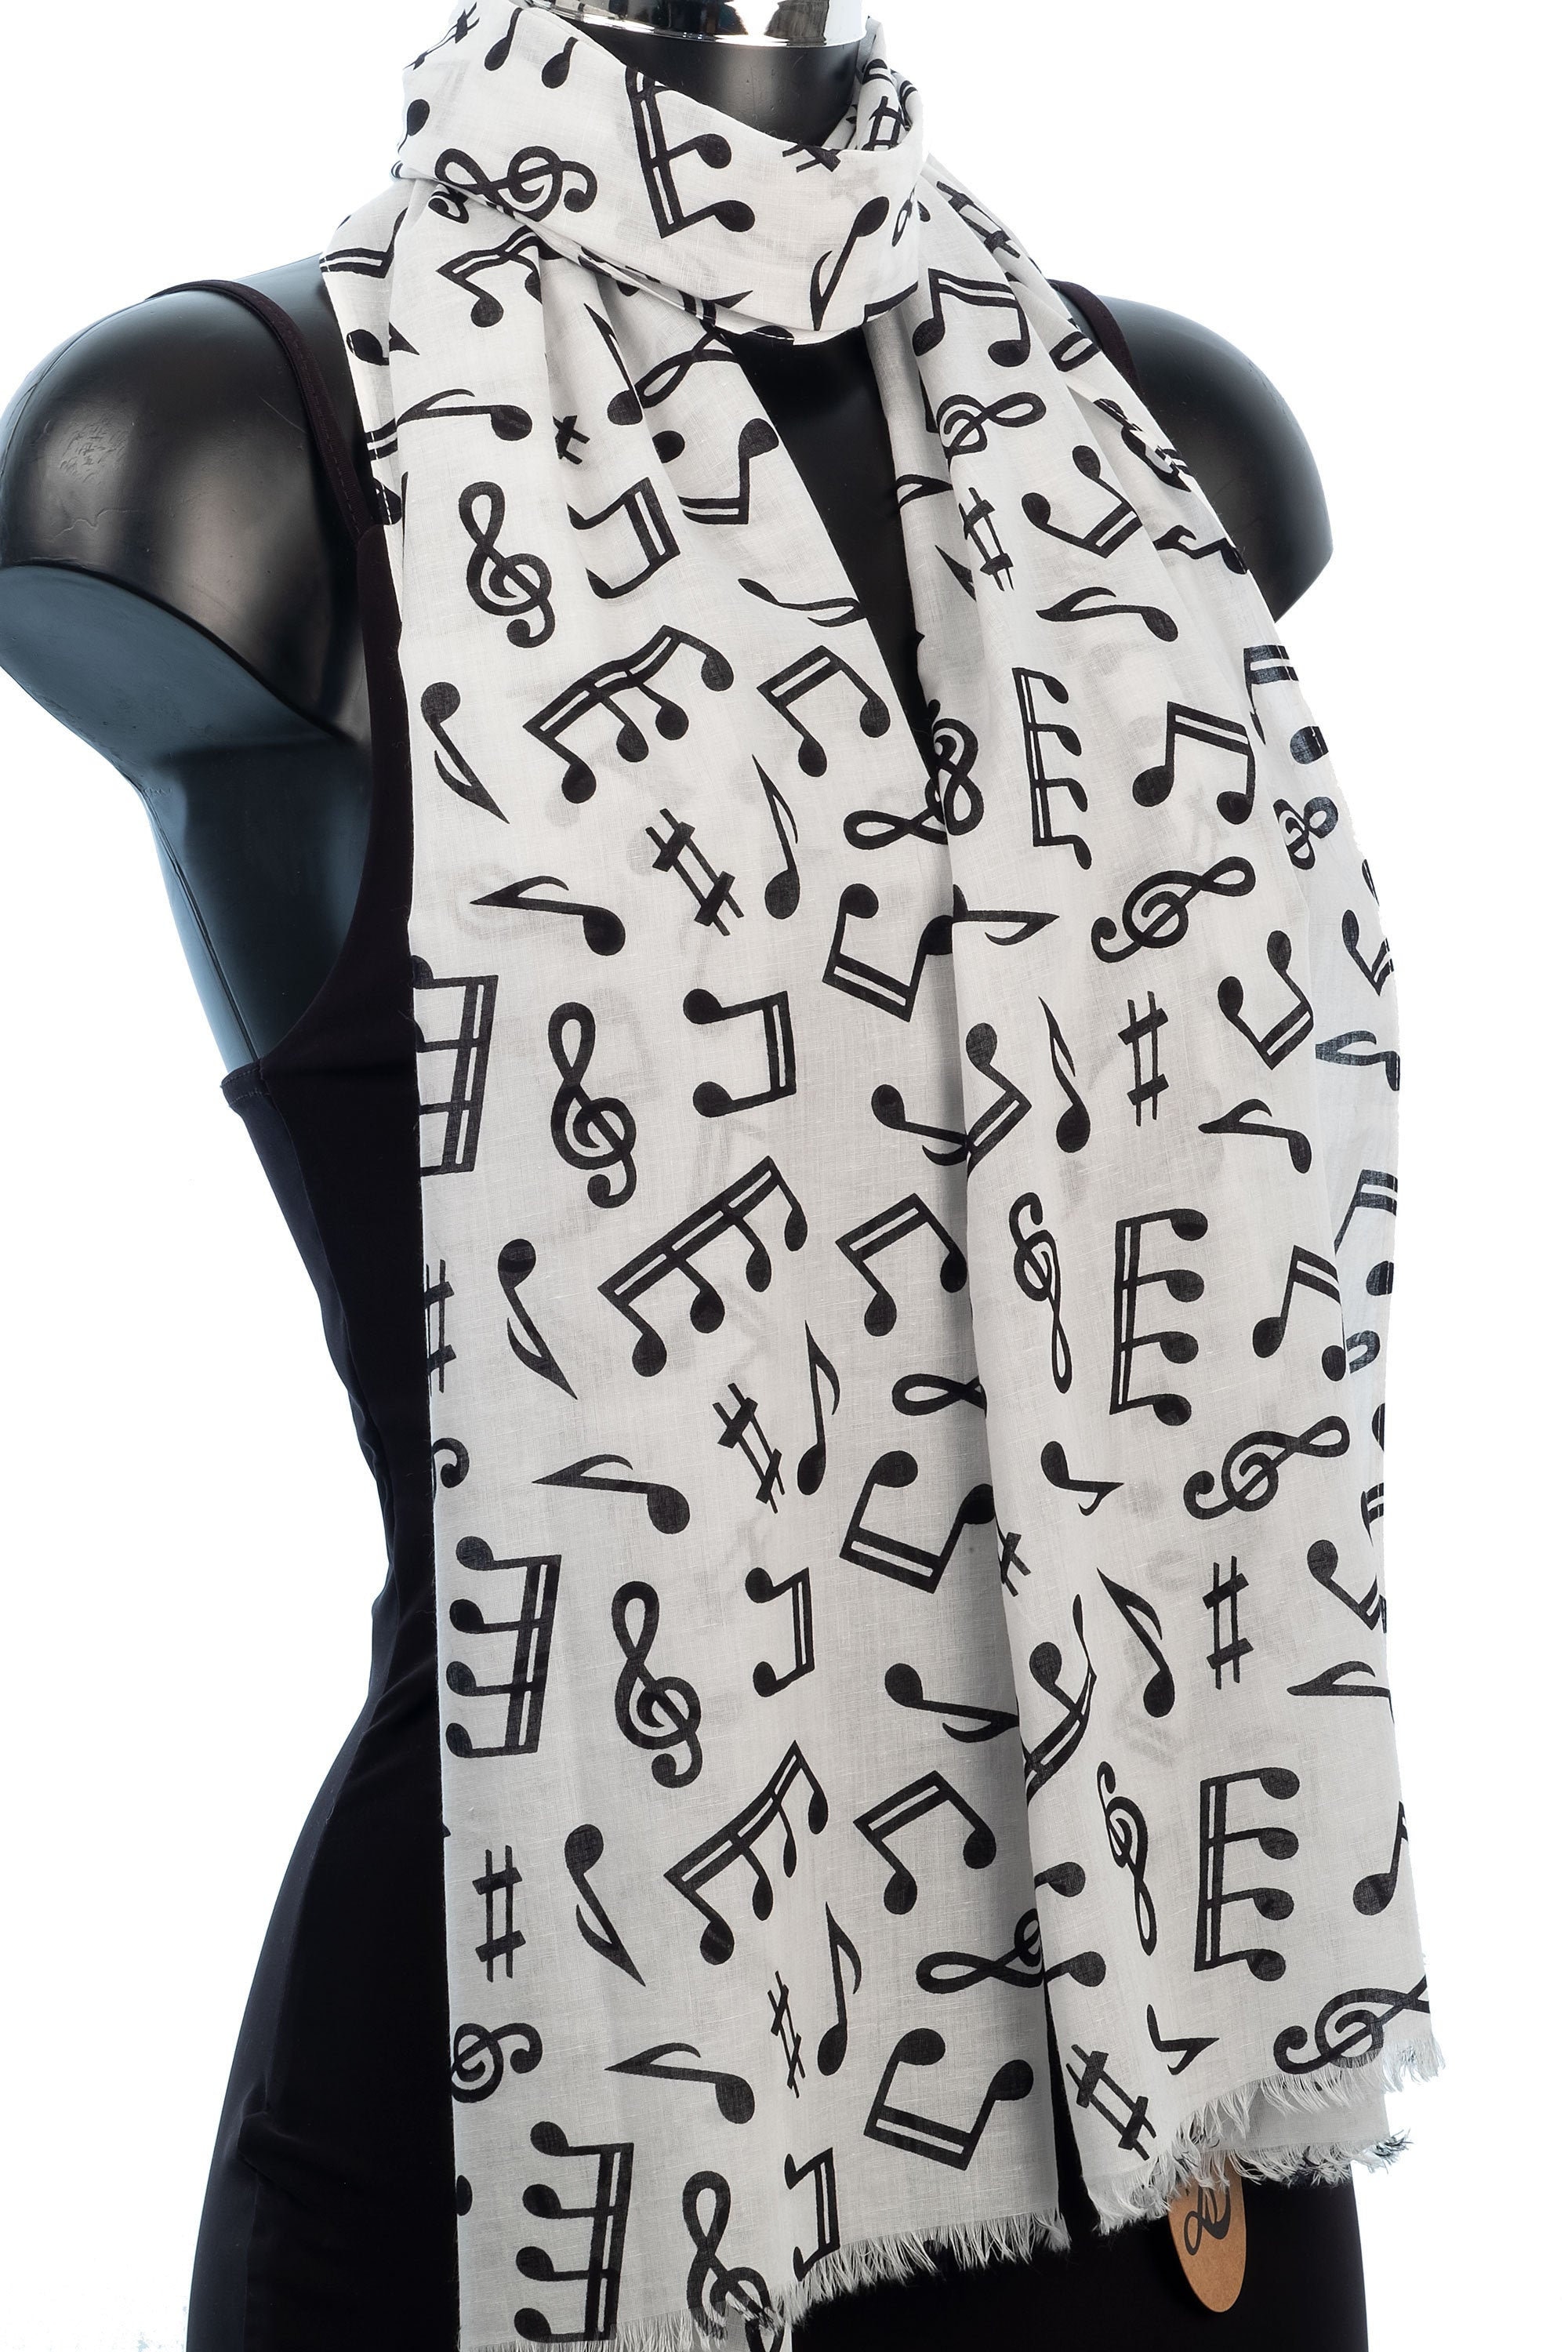 Fashionable Scarf with Musical Theme